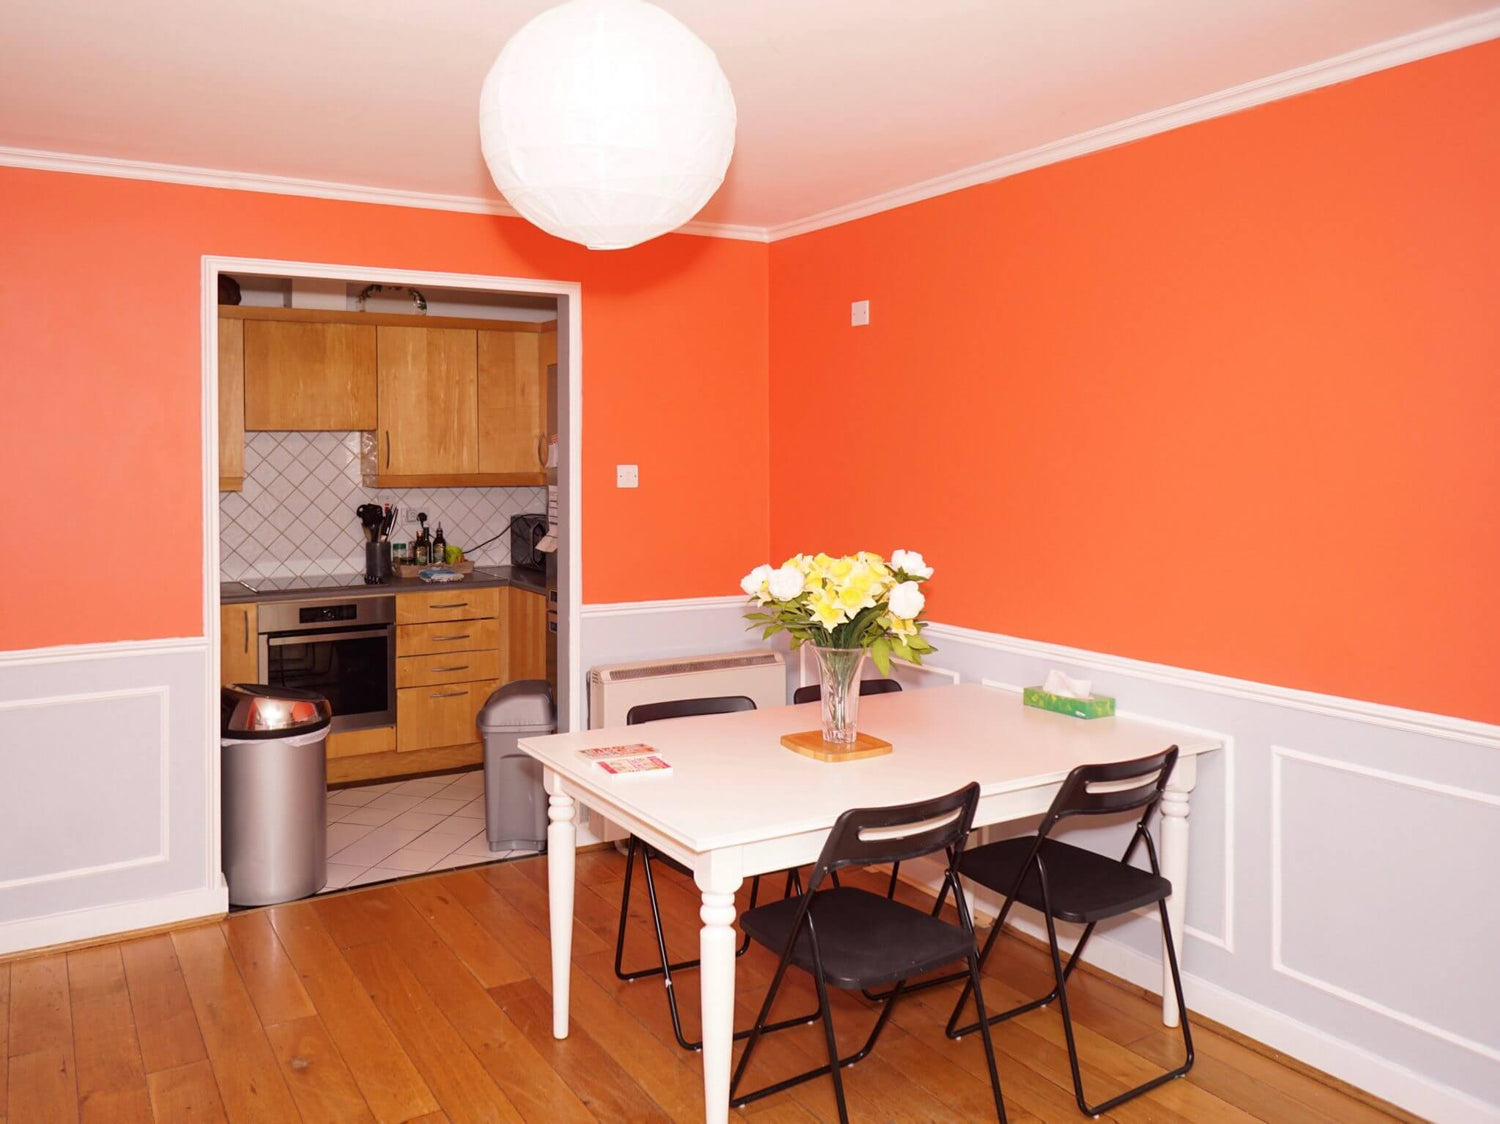 Orlando - Modern Coving in a room with an orange colour scheme